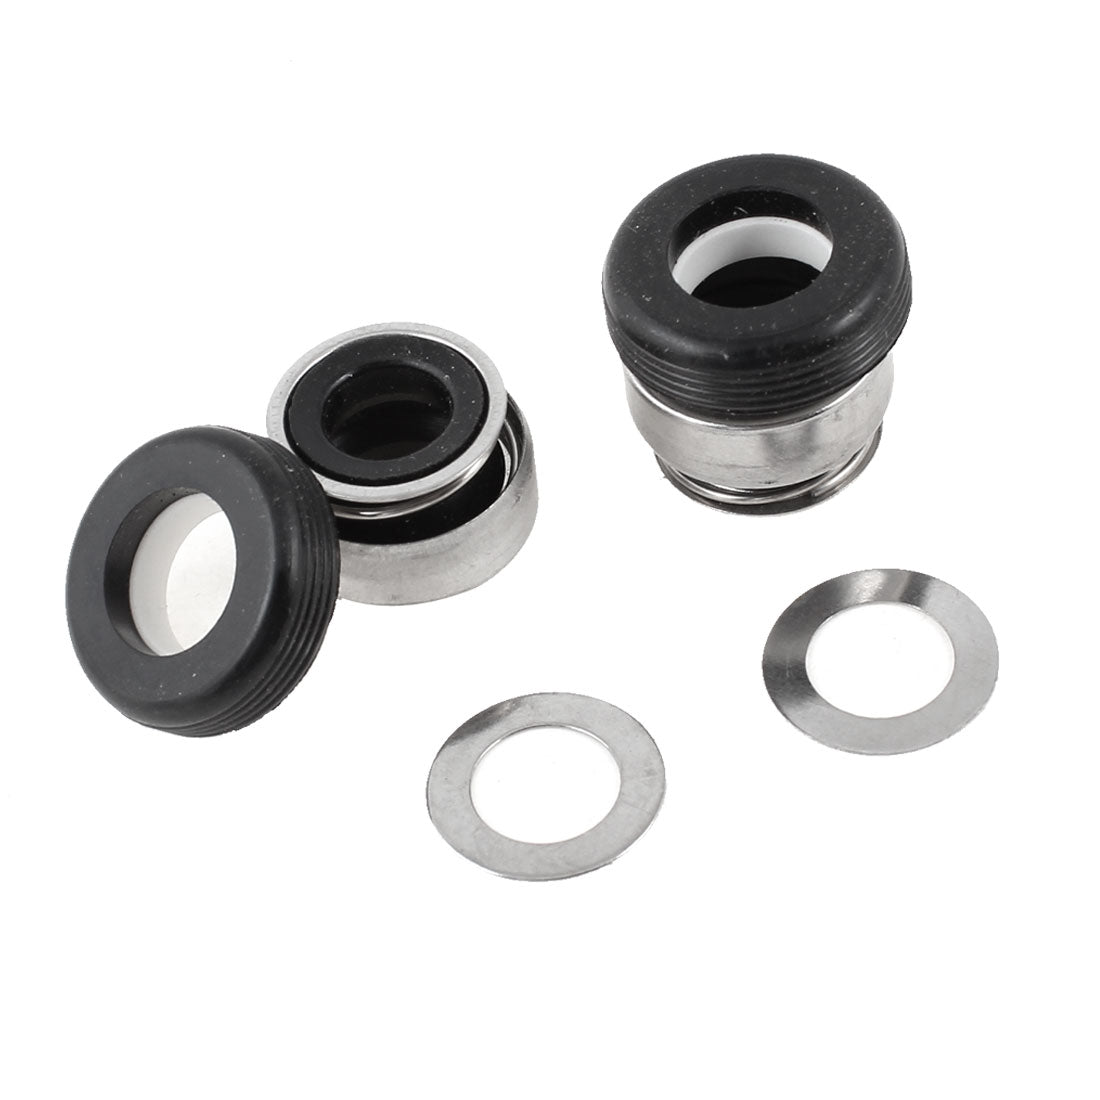 uxcell Uxcell 2pcs Ceramic Ring Water Pumps Industrial Mechanical Seal 12mm Minimum Inner Dia